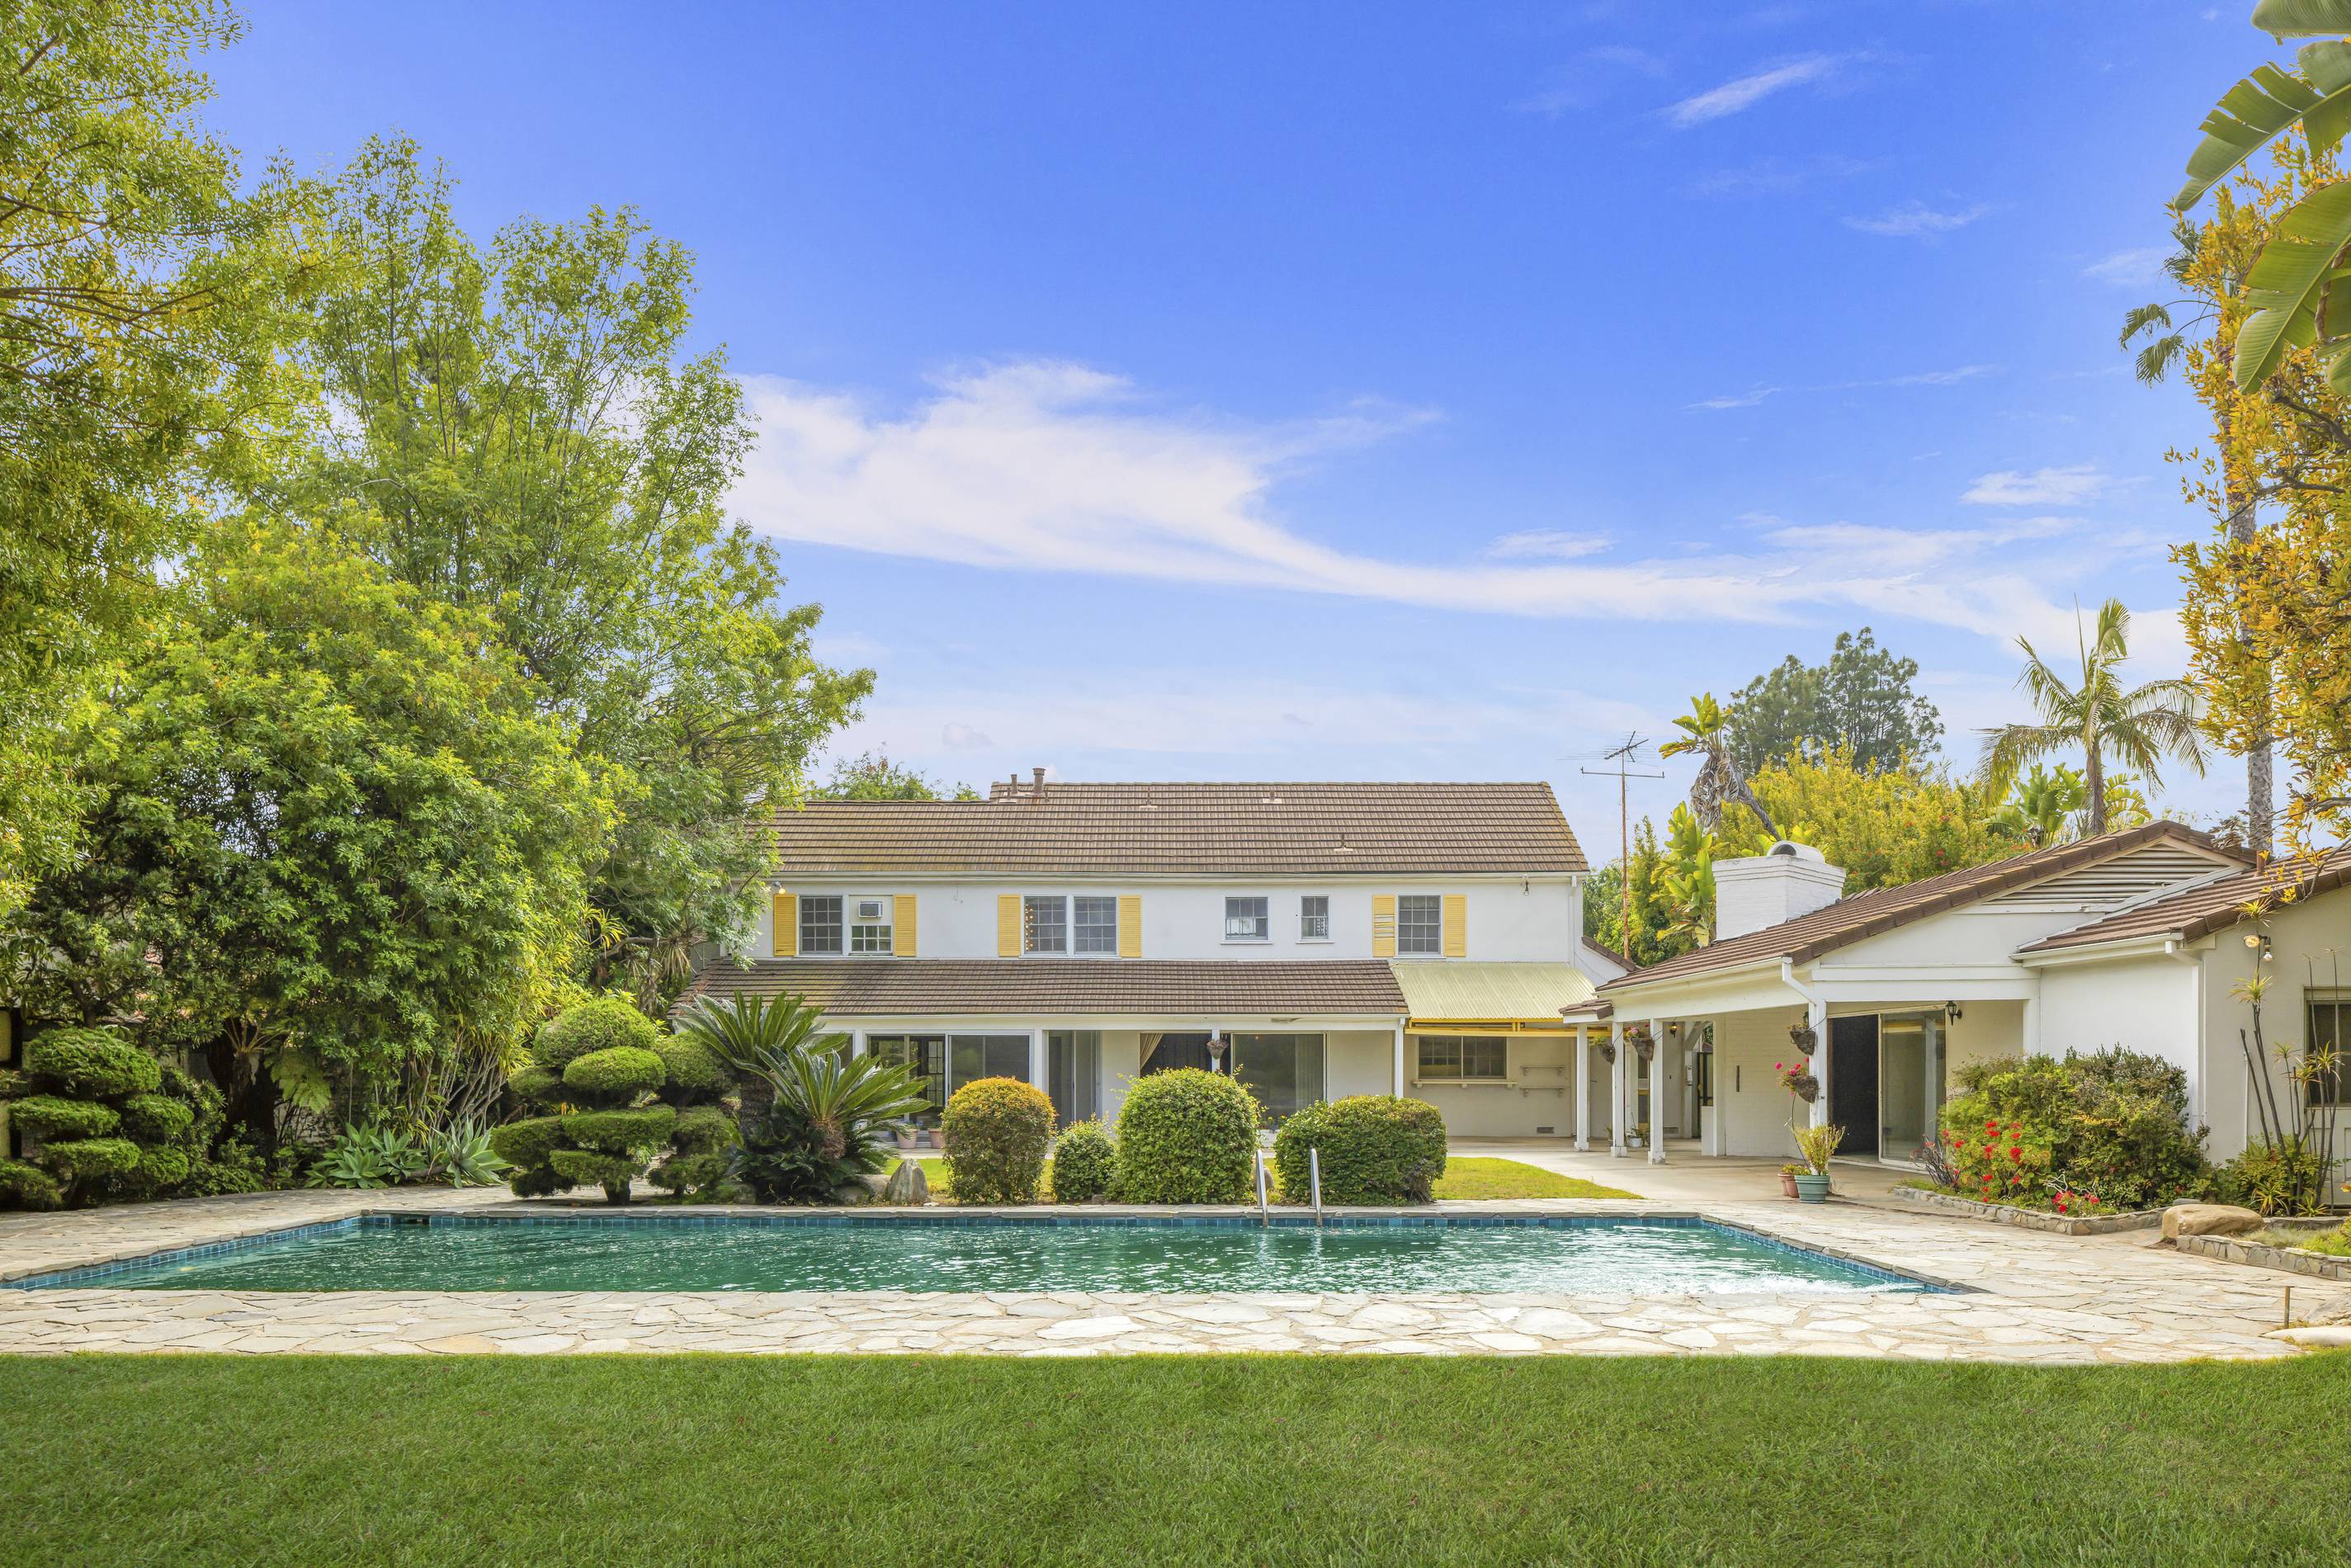 Betty White Brentwood home